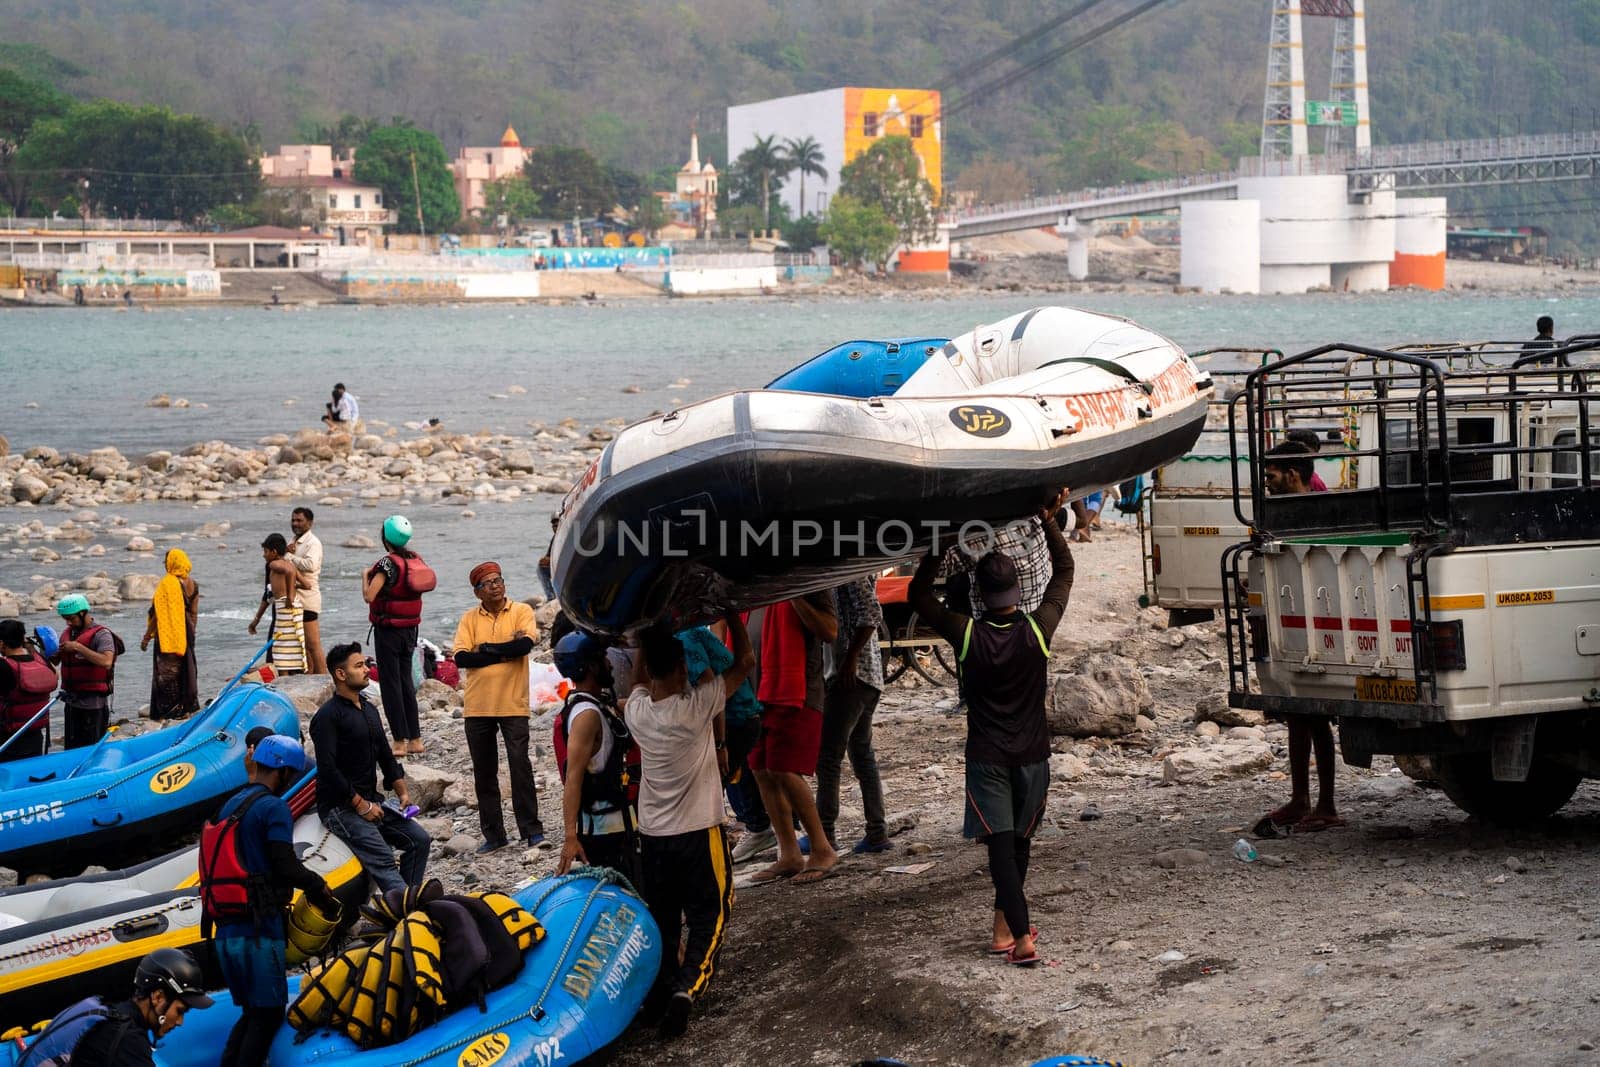 Rishikesh, Haridwar, India - circa 2023: inflatable white water rafts on beach where the adventure sport ends with people taking away rafts and paddles for the next run